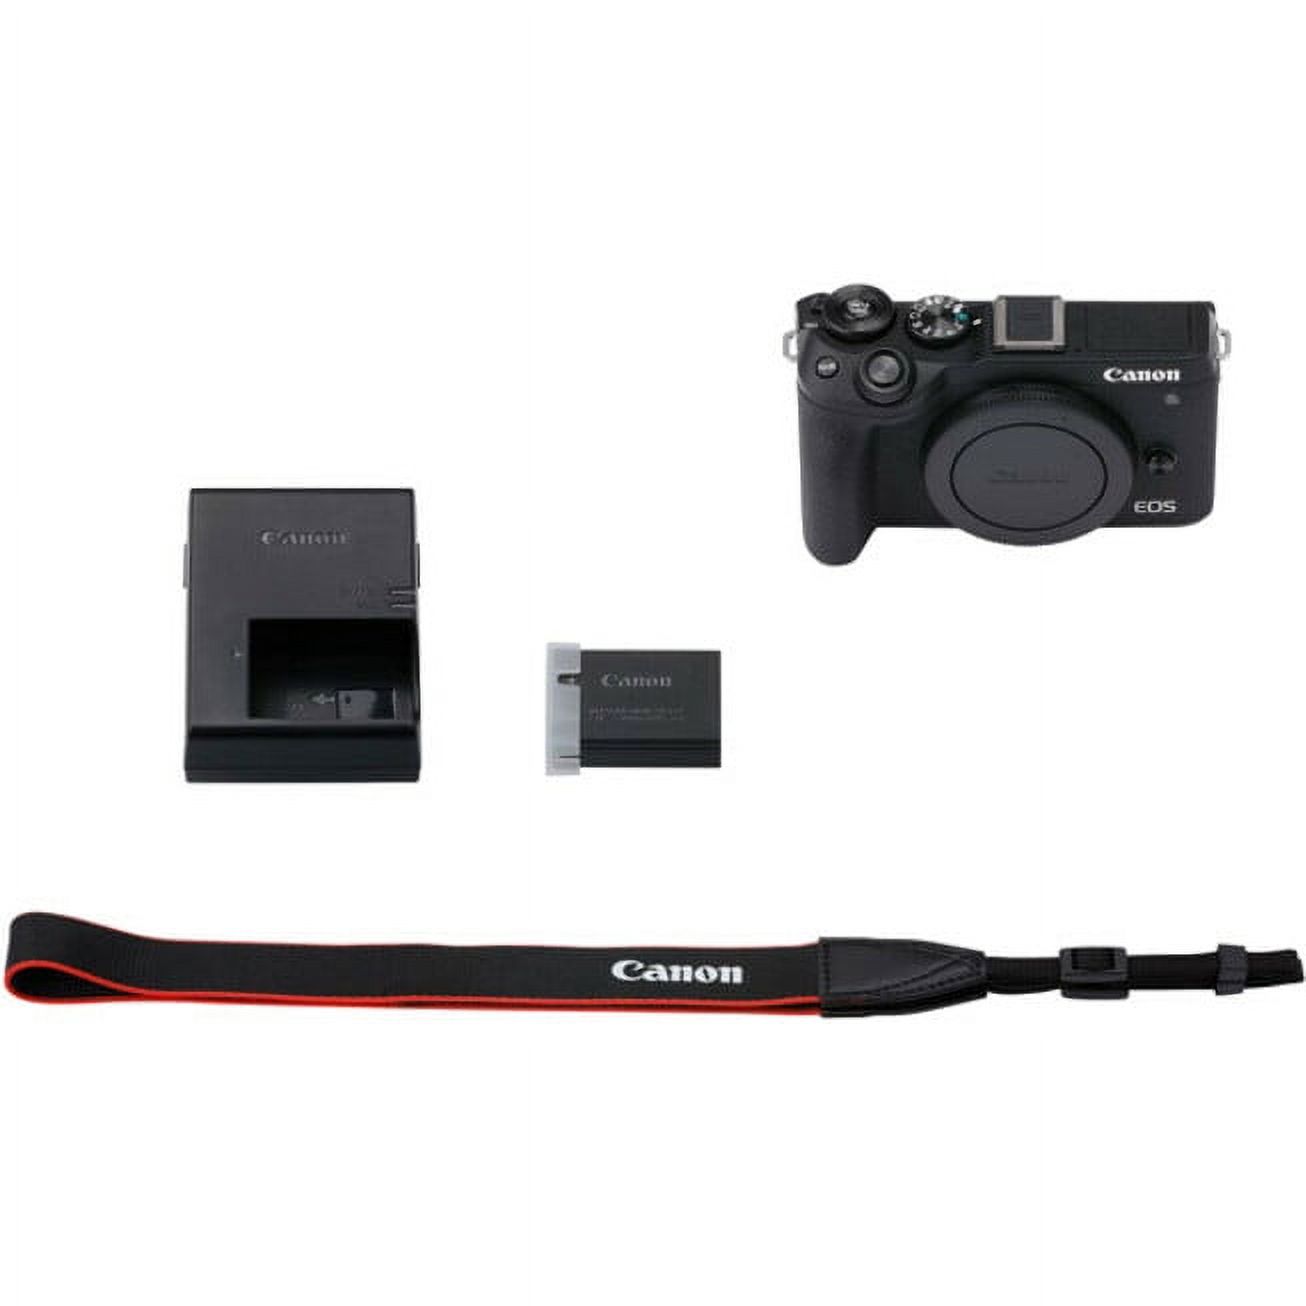 Canon EOS M6 Mark II 32.5 Megapixel Mirrorless Camera Body Only, Black - image 3 of 3